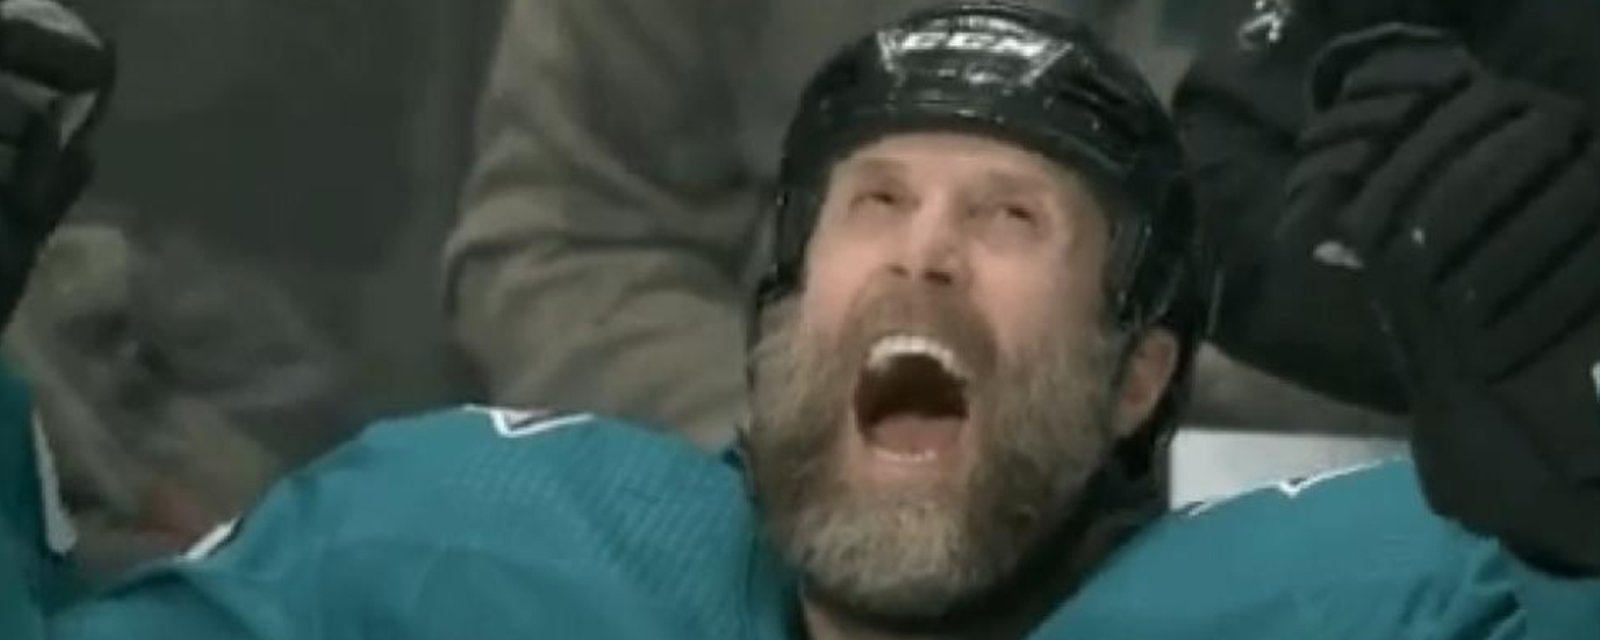 ICYMI: Joe Thornton scored a hat trick against the Bruins and had the best celly of the 2018-19 season.